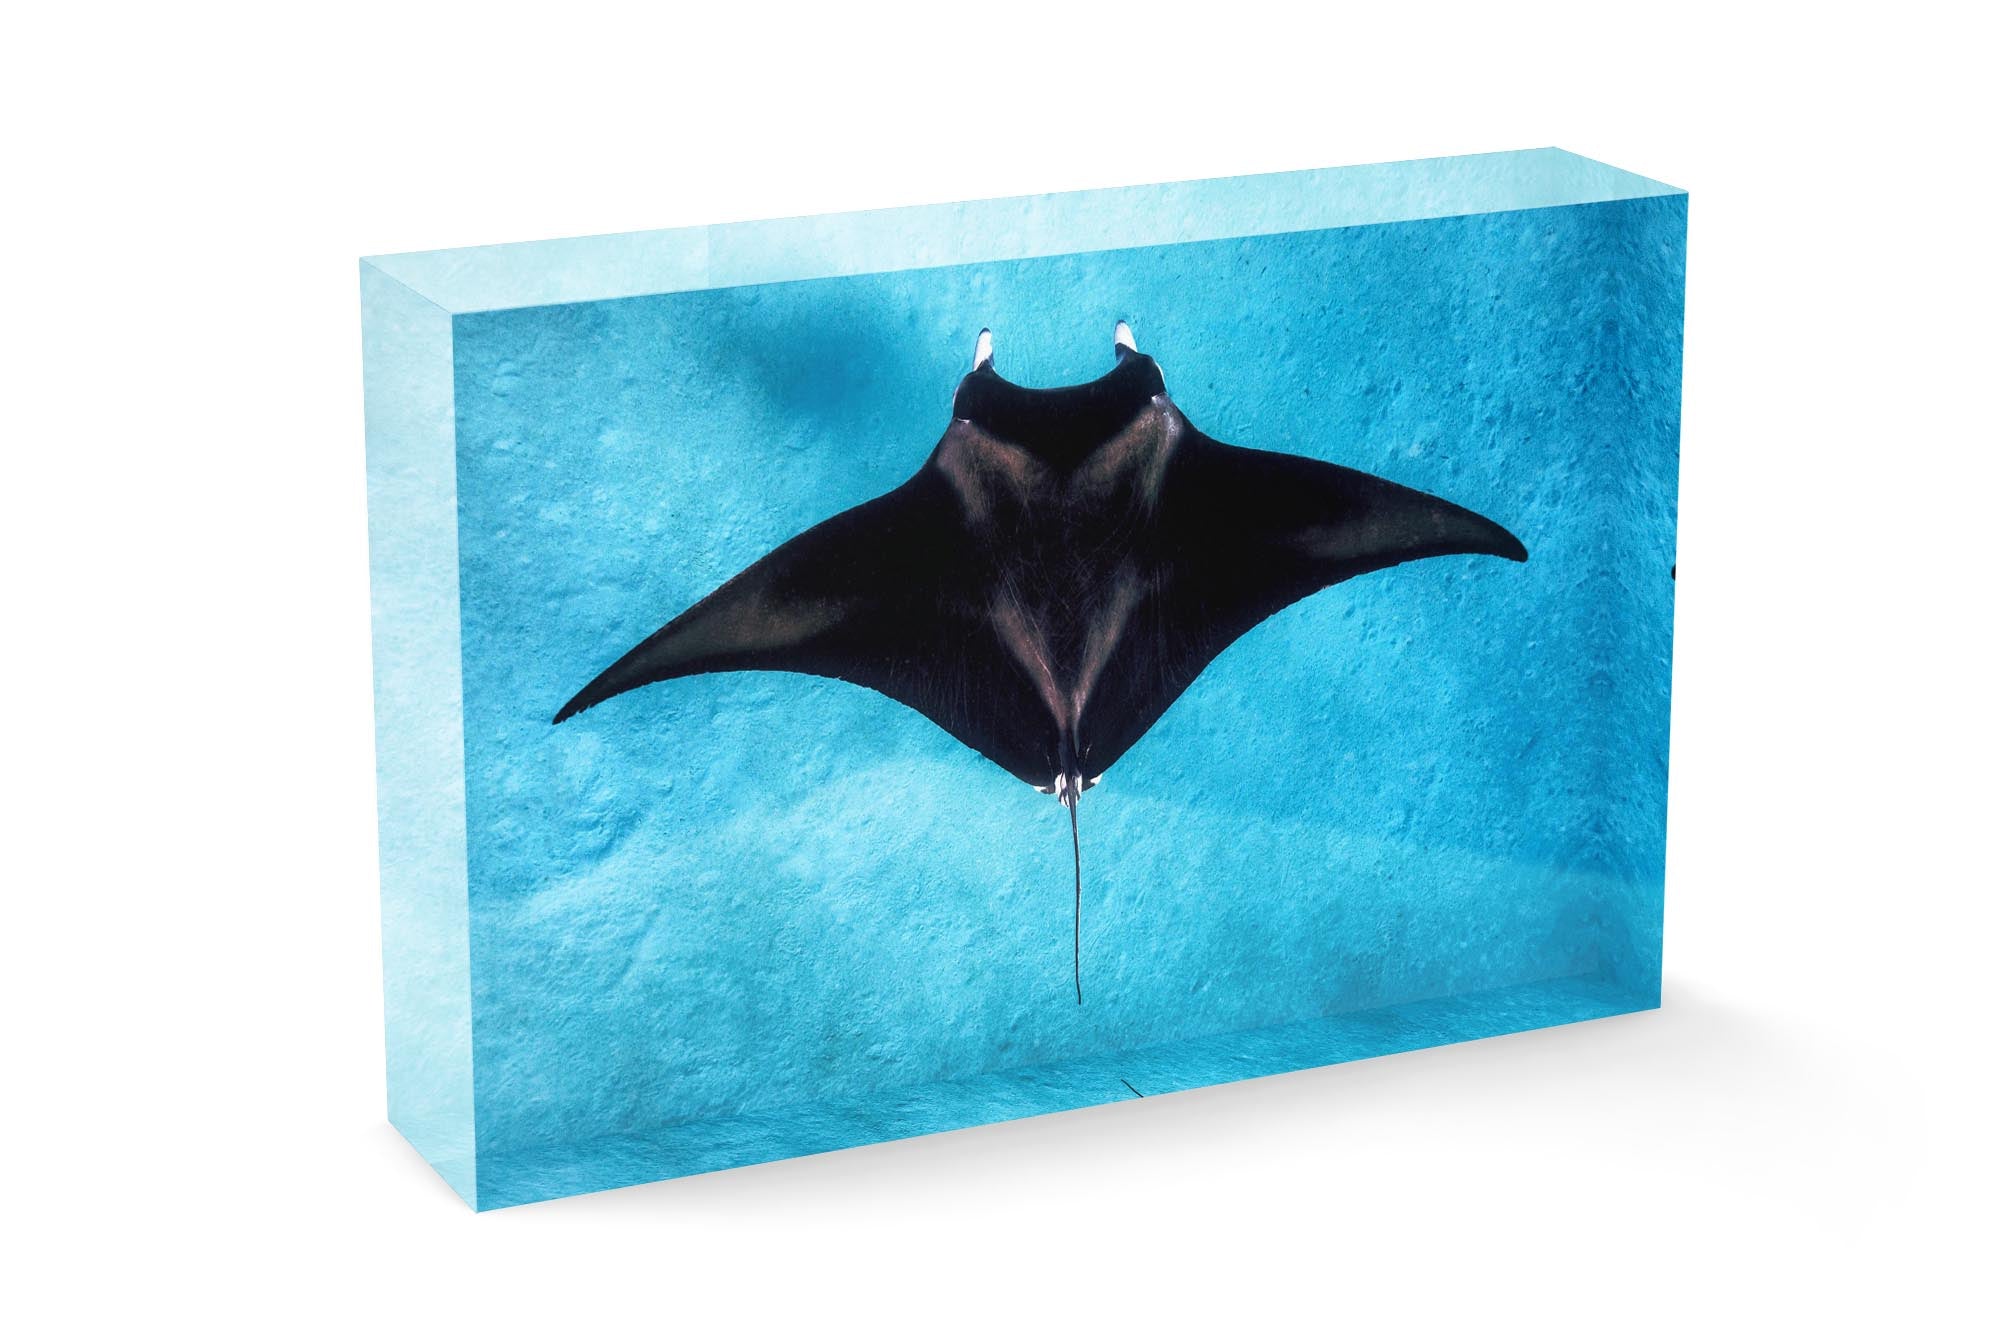 Manta Ray Clarity Great Barrier Reef